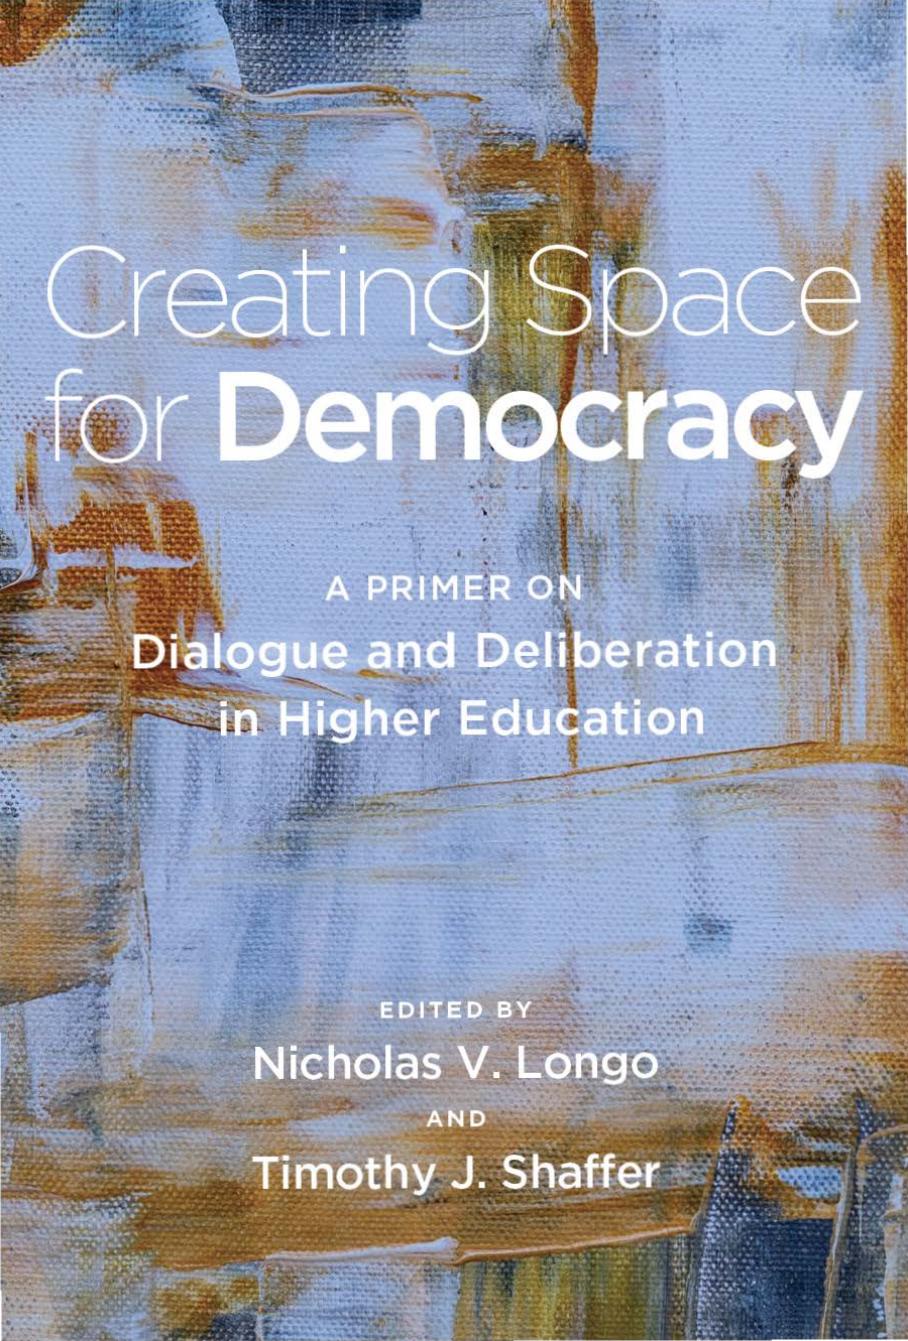 Creating Space for Democracy: A Primer on Dialogue and Deliberation in Higher Education by Timothy J. Shaffer; Nicholas V. Longo